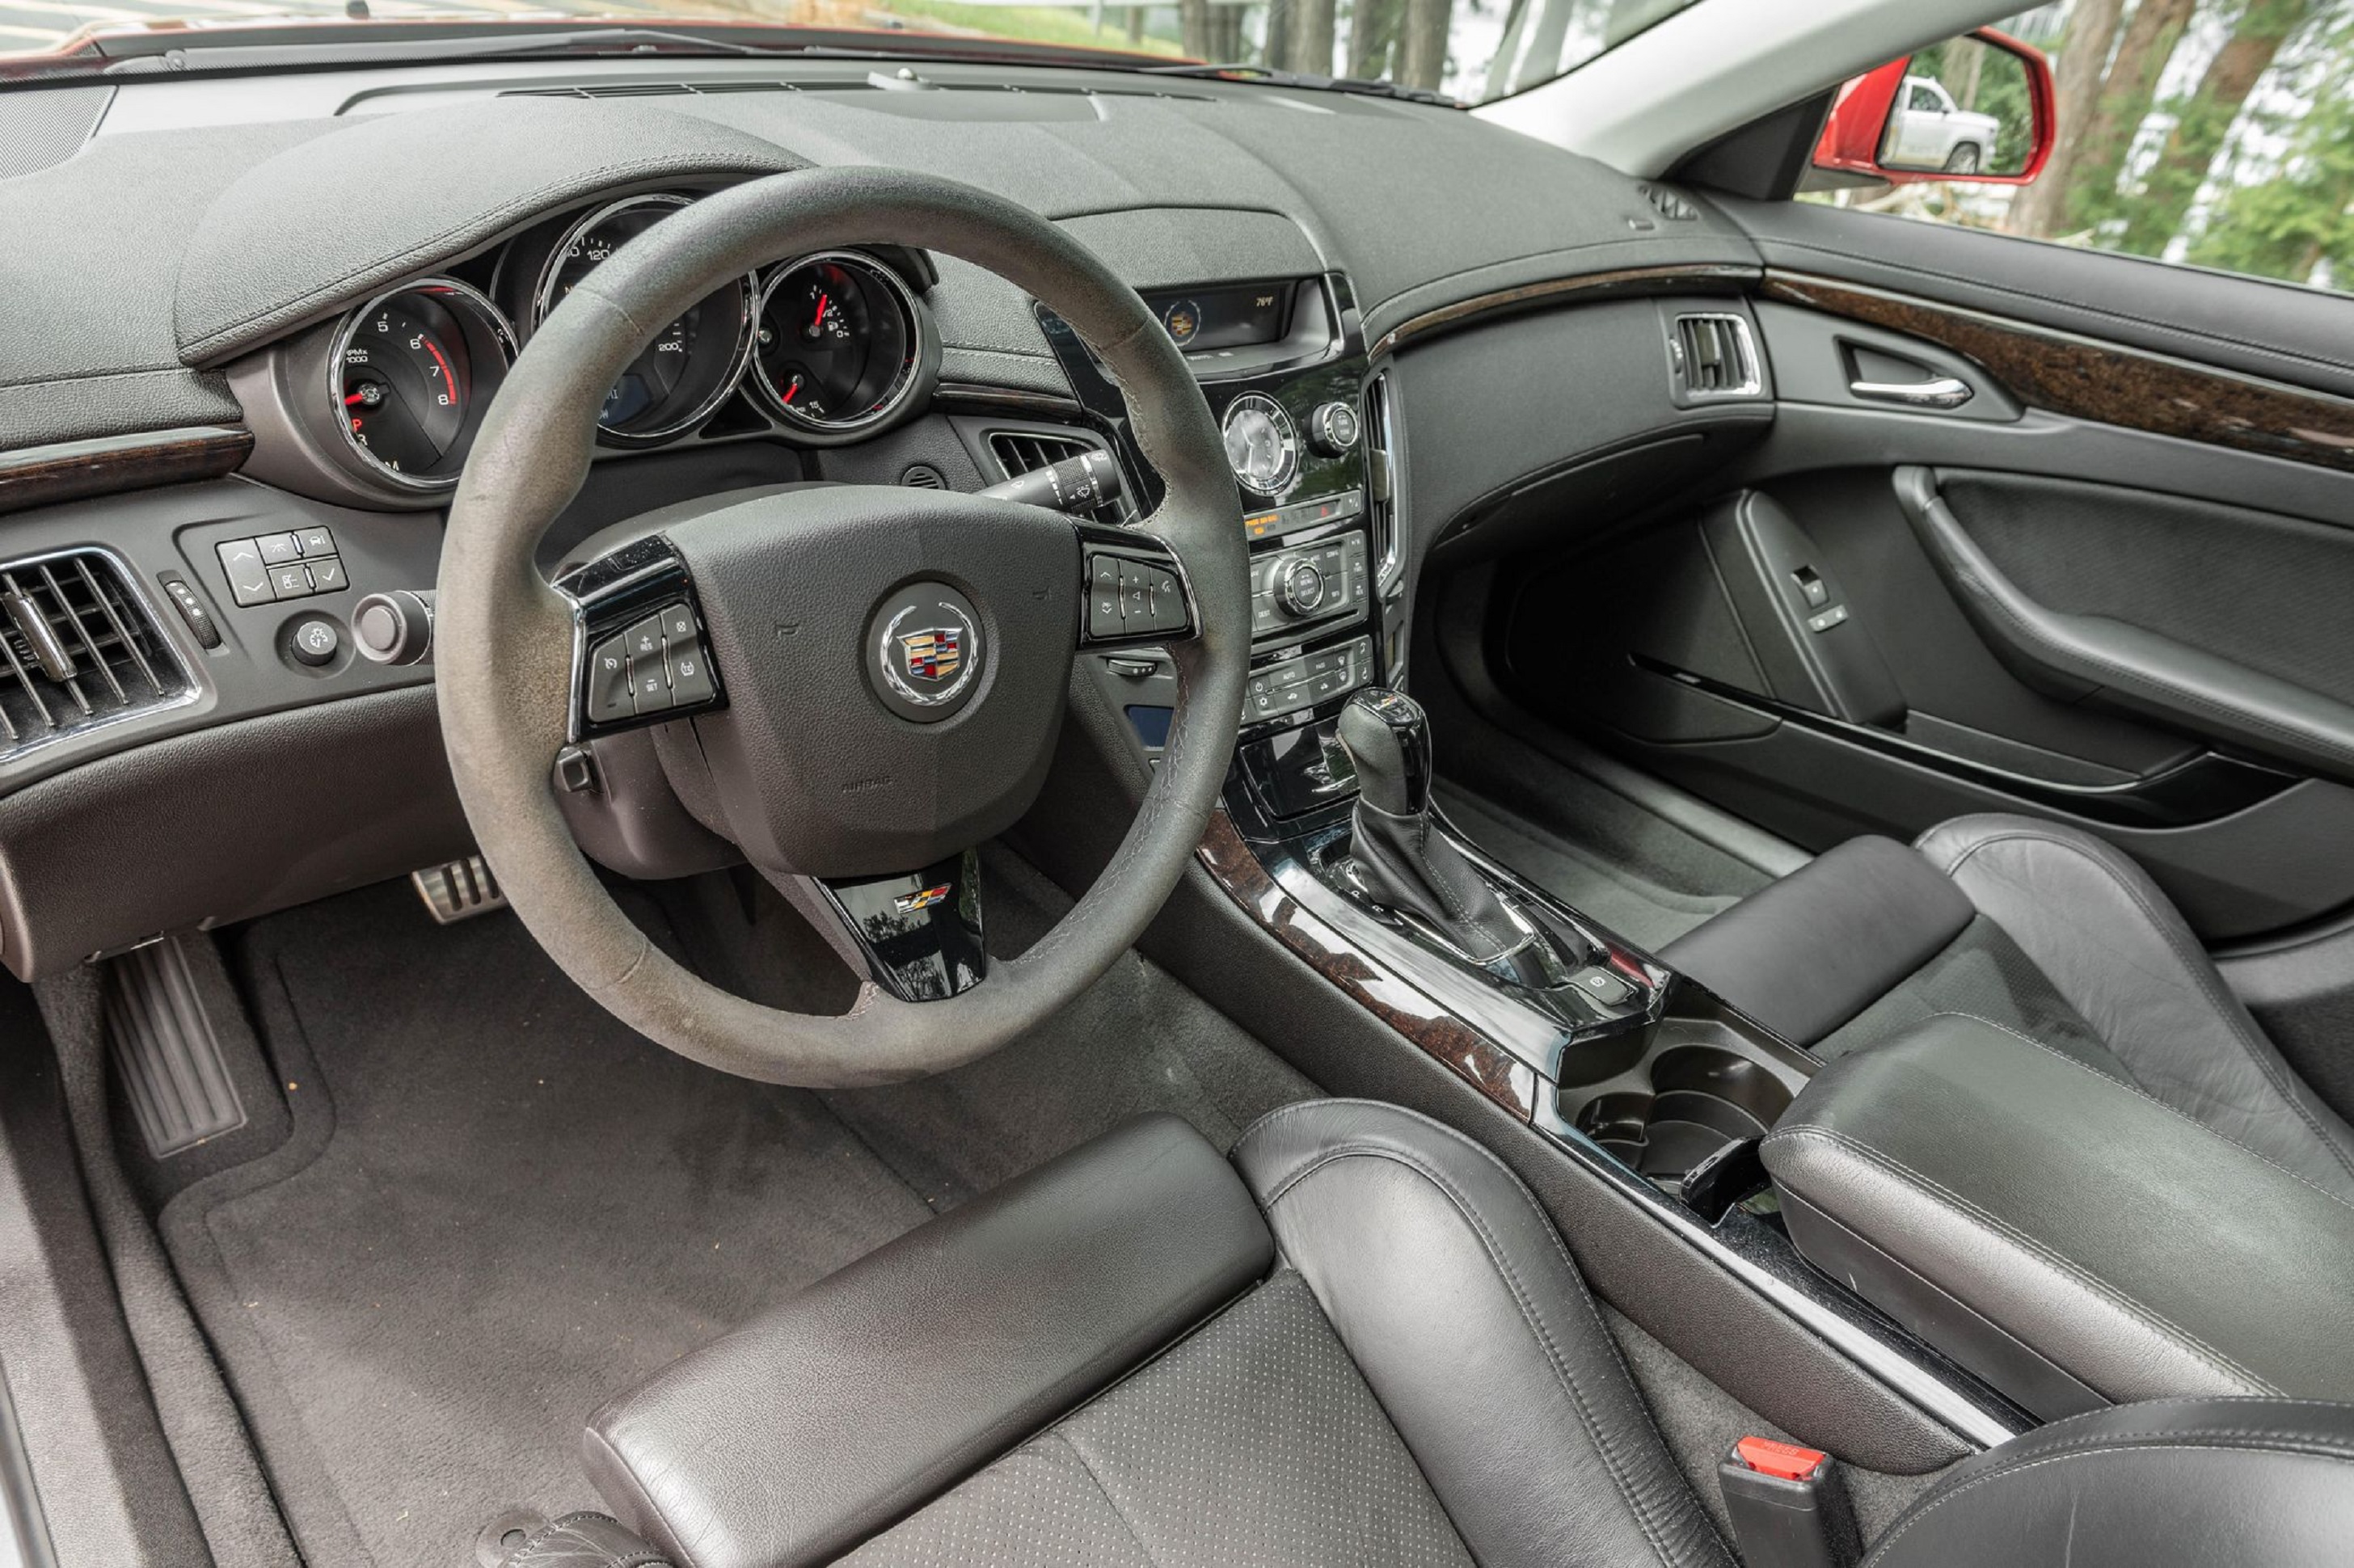 The black leather Recaro front seats and black dashboard of a 2011 Cadillac CTS-V Sedan